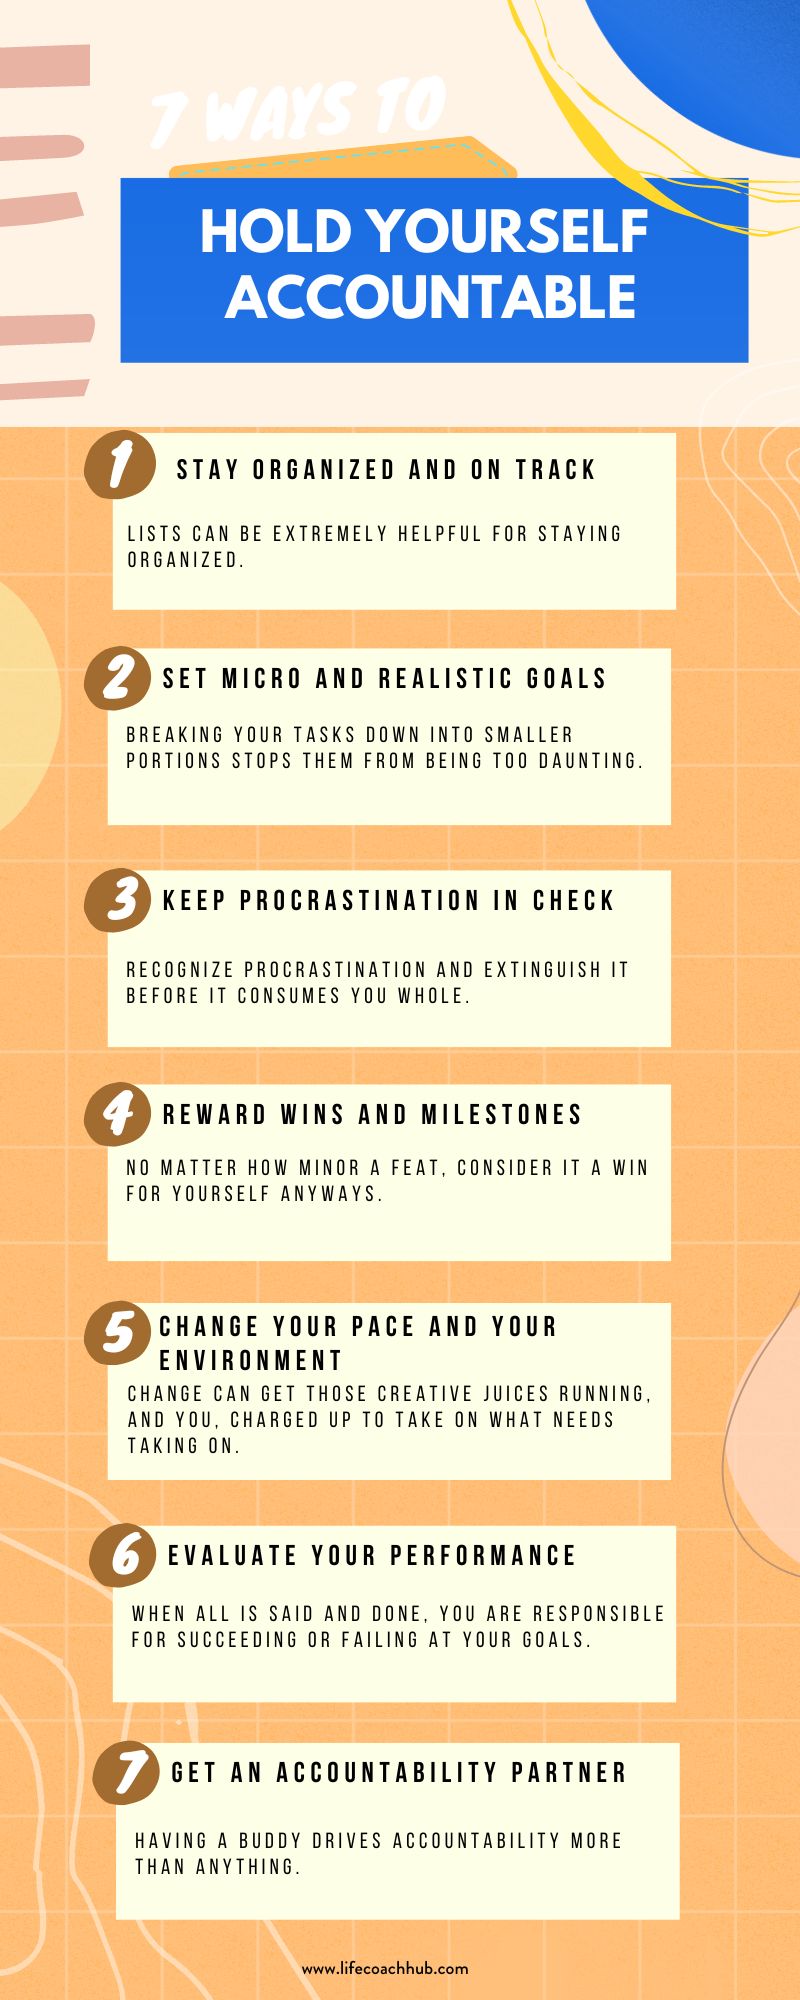 7 ways to hold yourself accountable infographic coaching tip